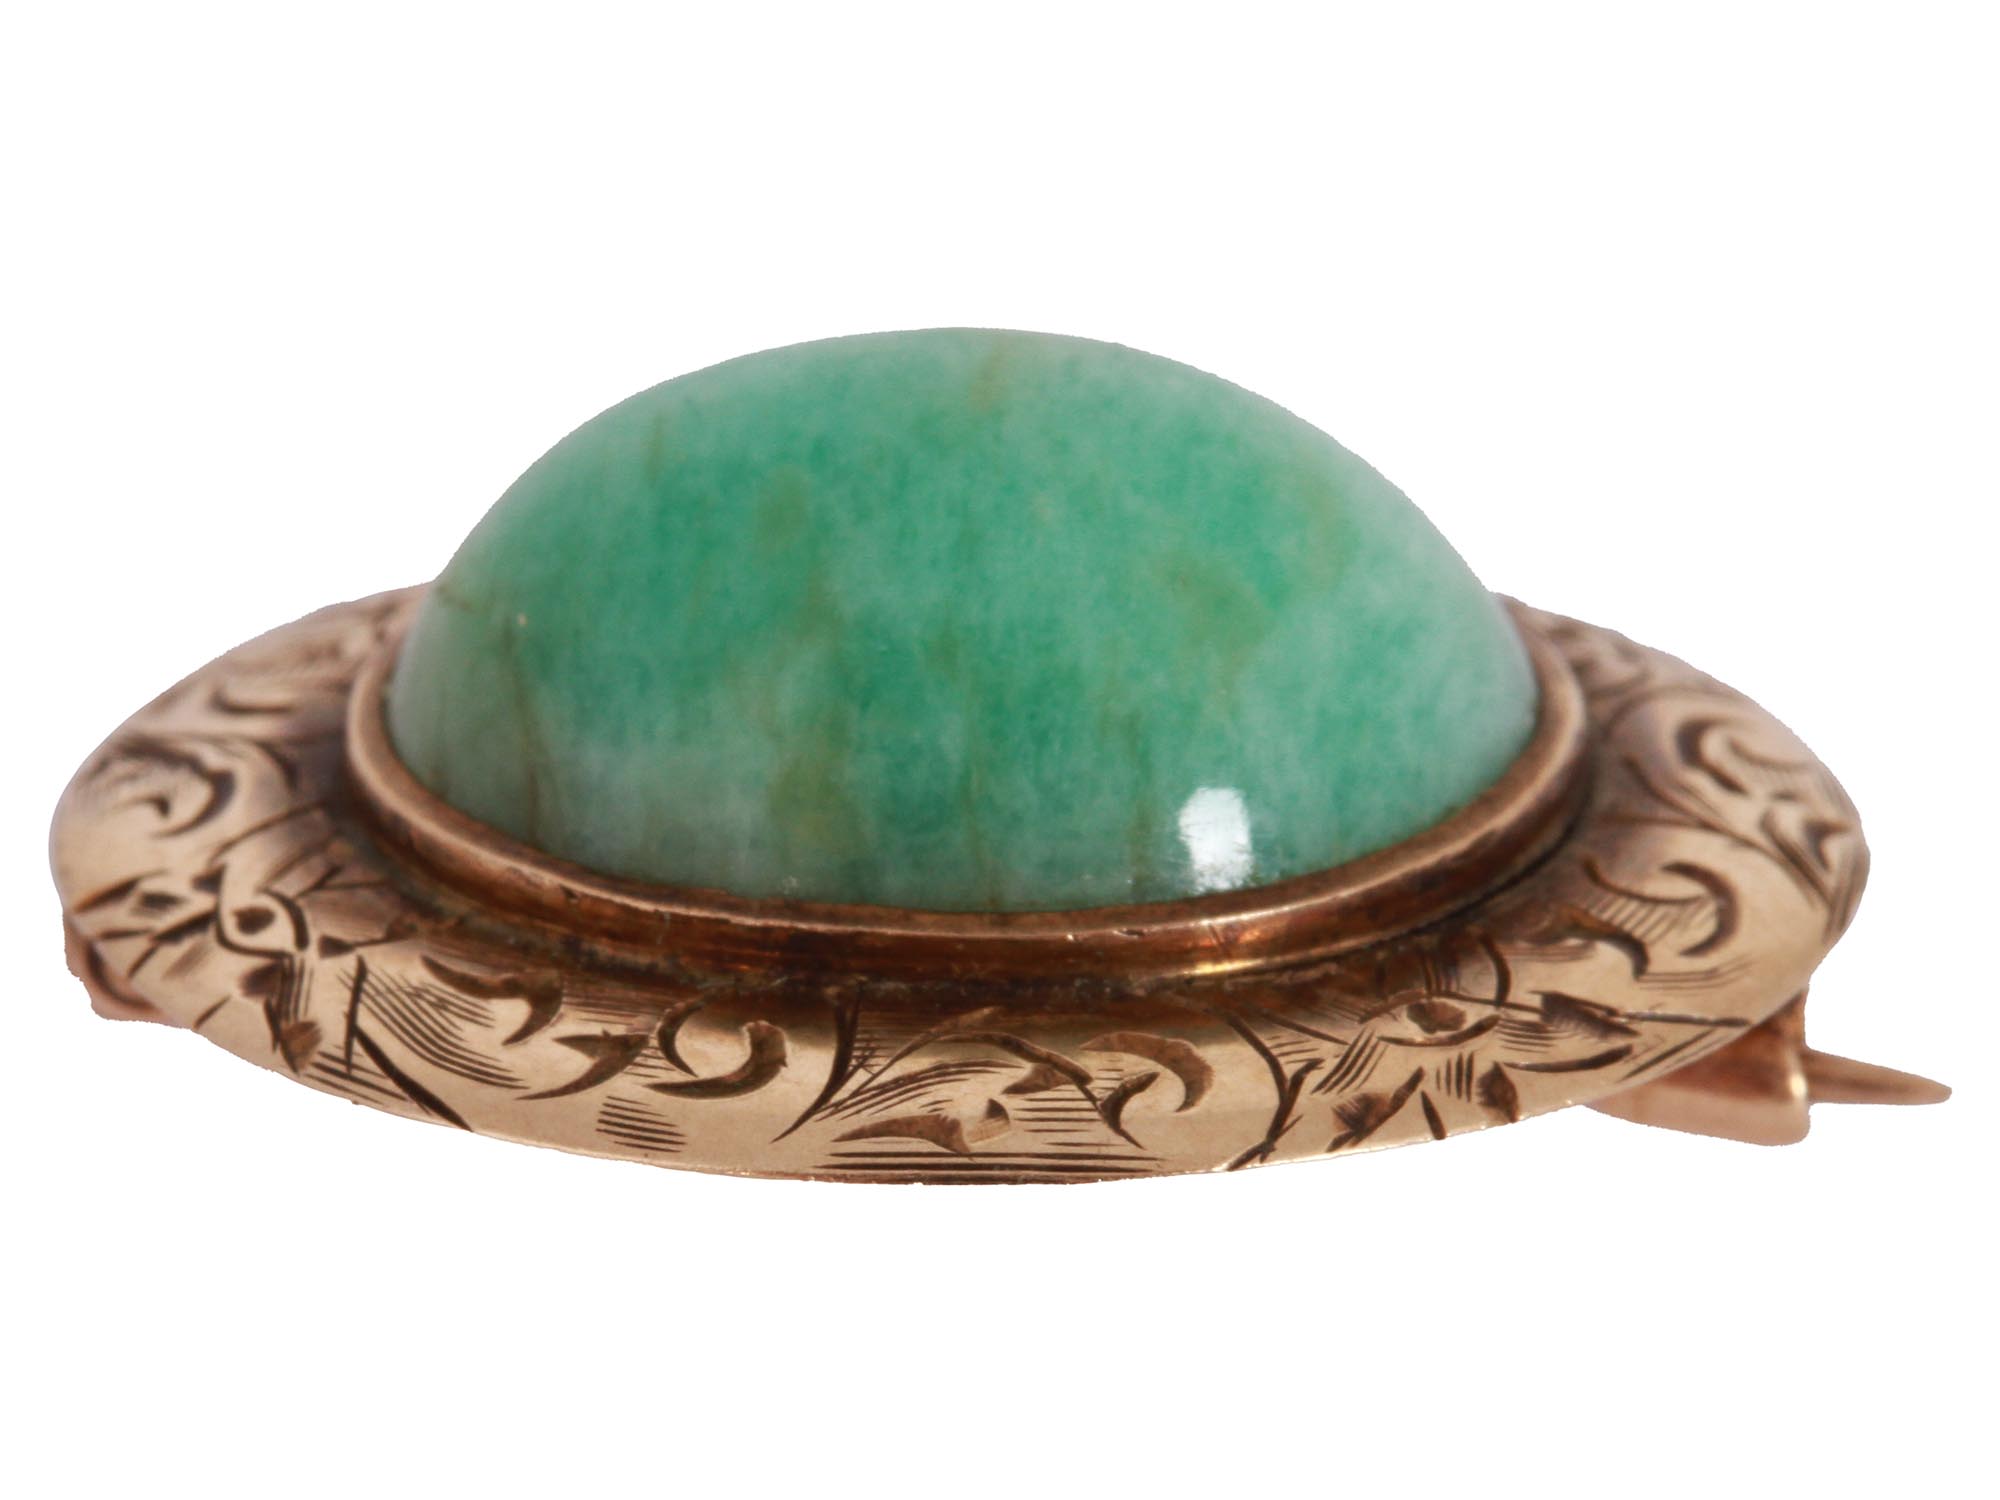 14K GOLD AND JADE STONE PIN BROOCH WITH ENGRAVING PIC-2